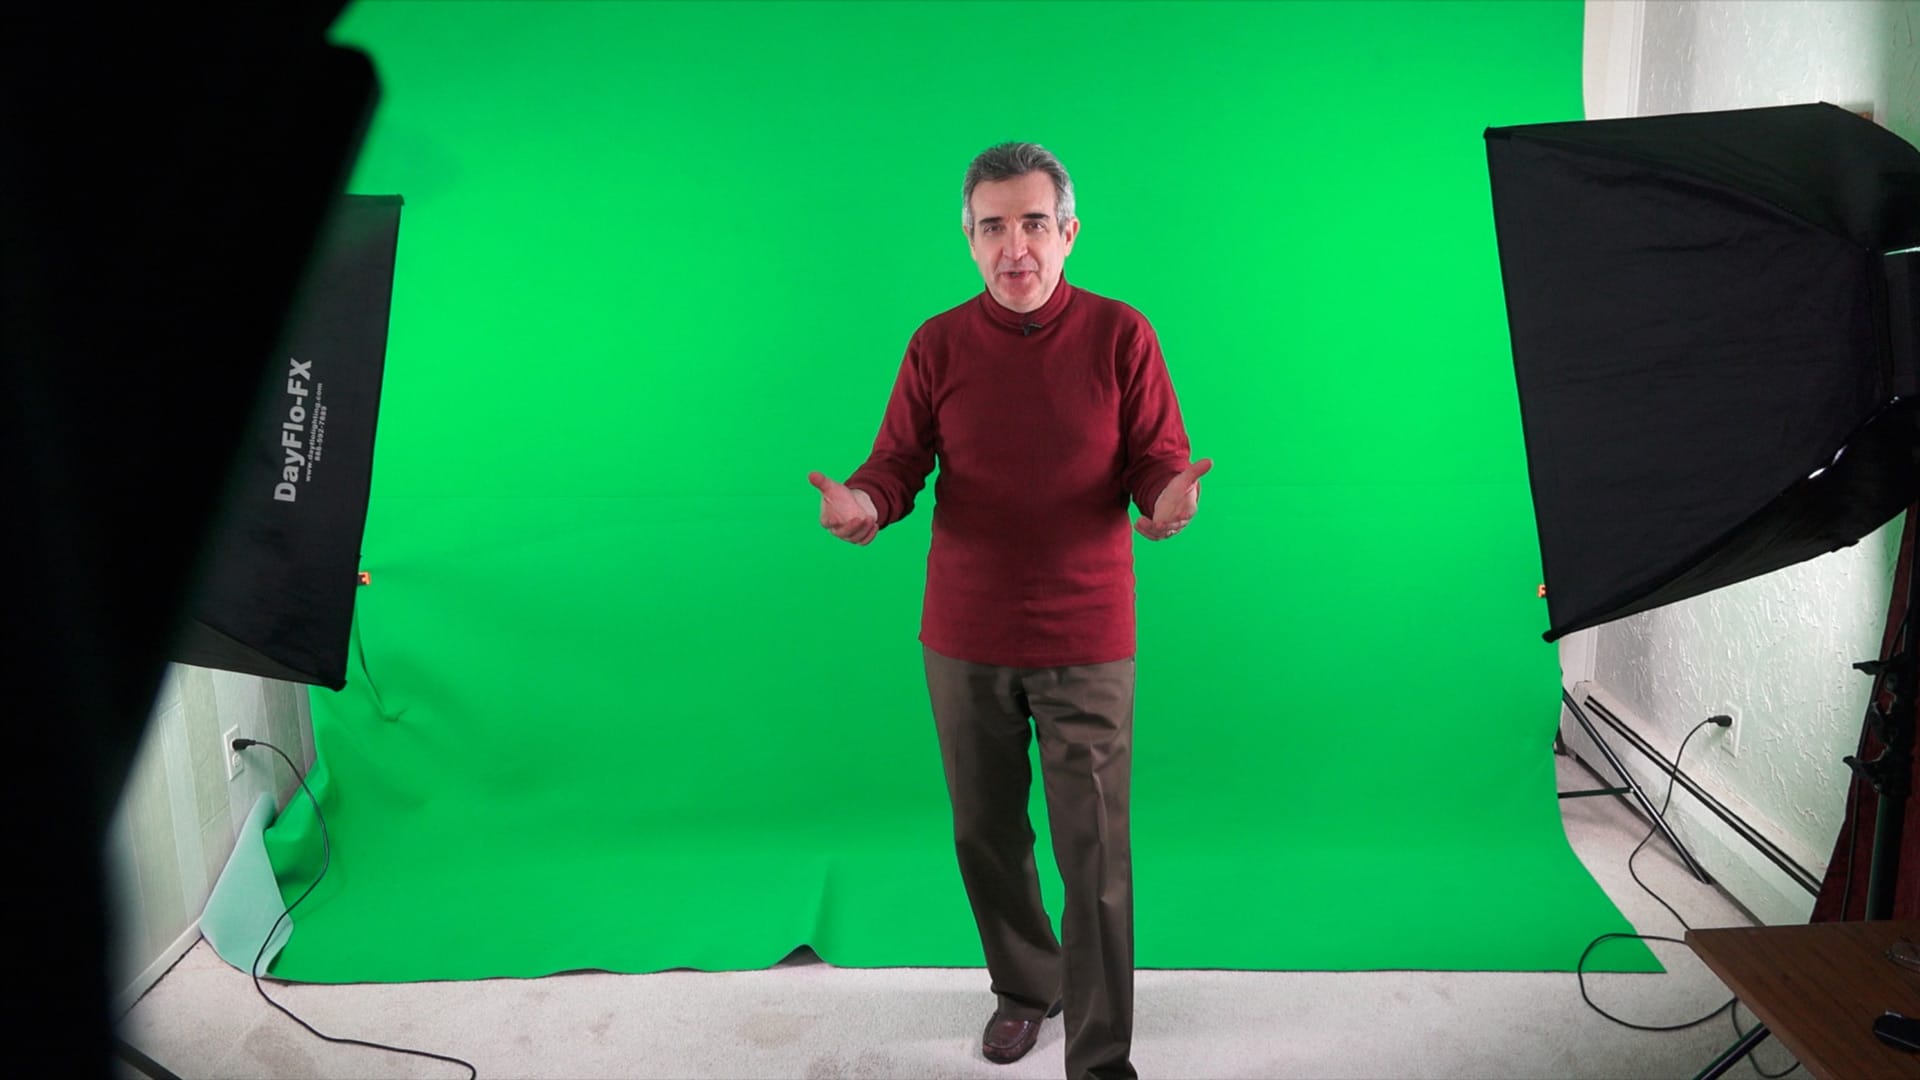 Greenscreen – Your Authority-Building Tool